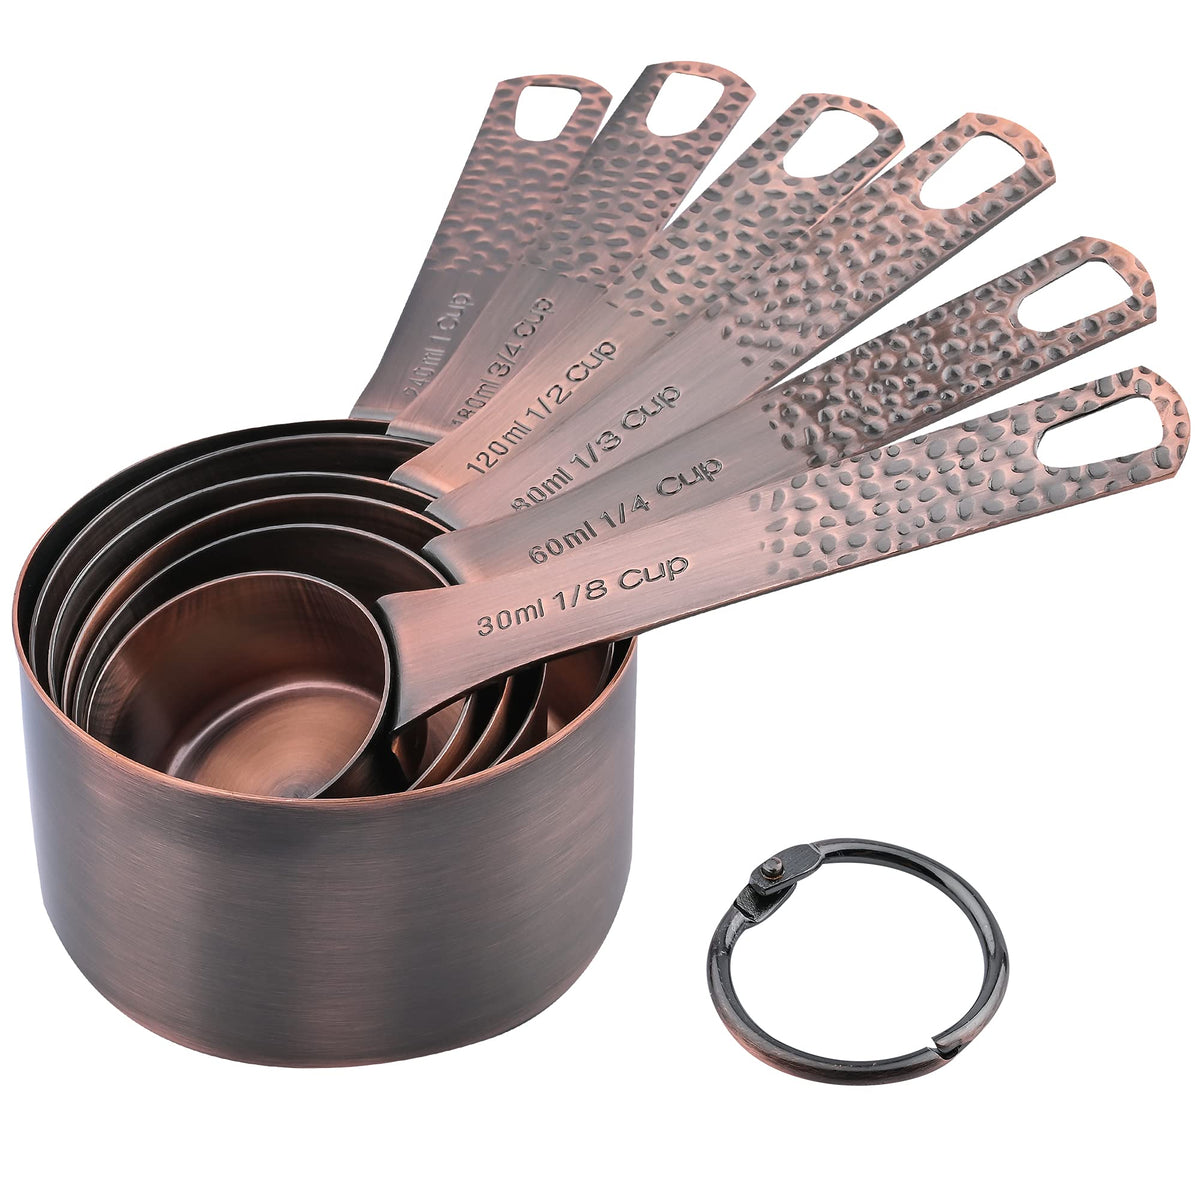 Stainless Steel Measuring Cup Set - Precision Baking & Cooking with  Stackable Copper Plated Cups - Complete Measuring Cup & Spoon Set (4 Cups  Measuring 1/4 cup, 1/3 cup, 1/2 cup, 1 cup)